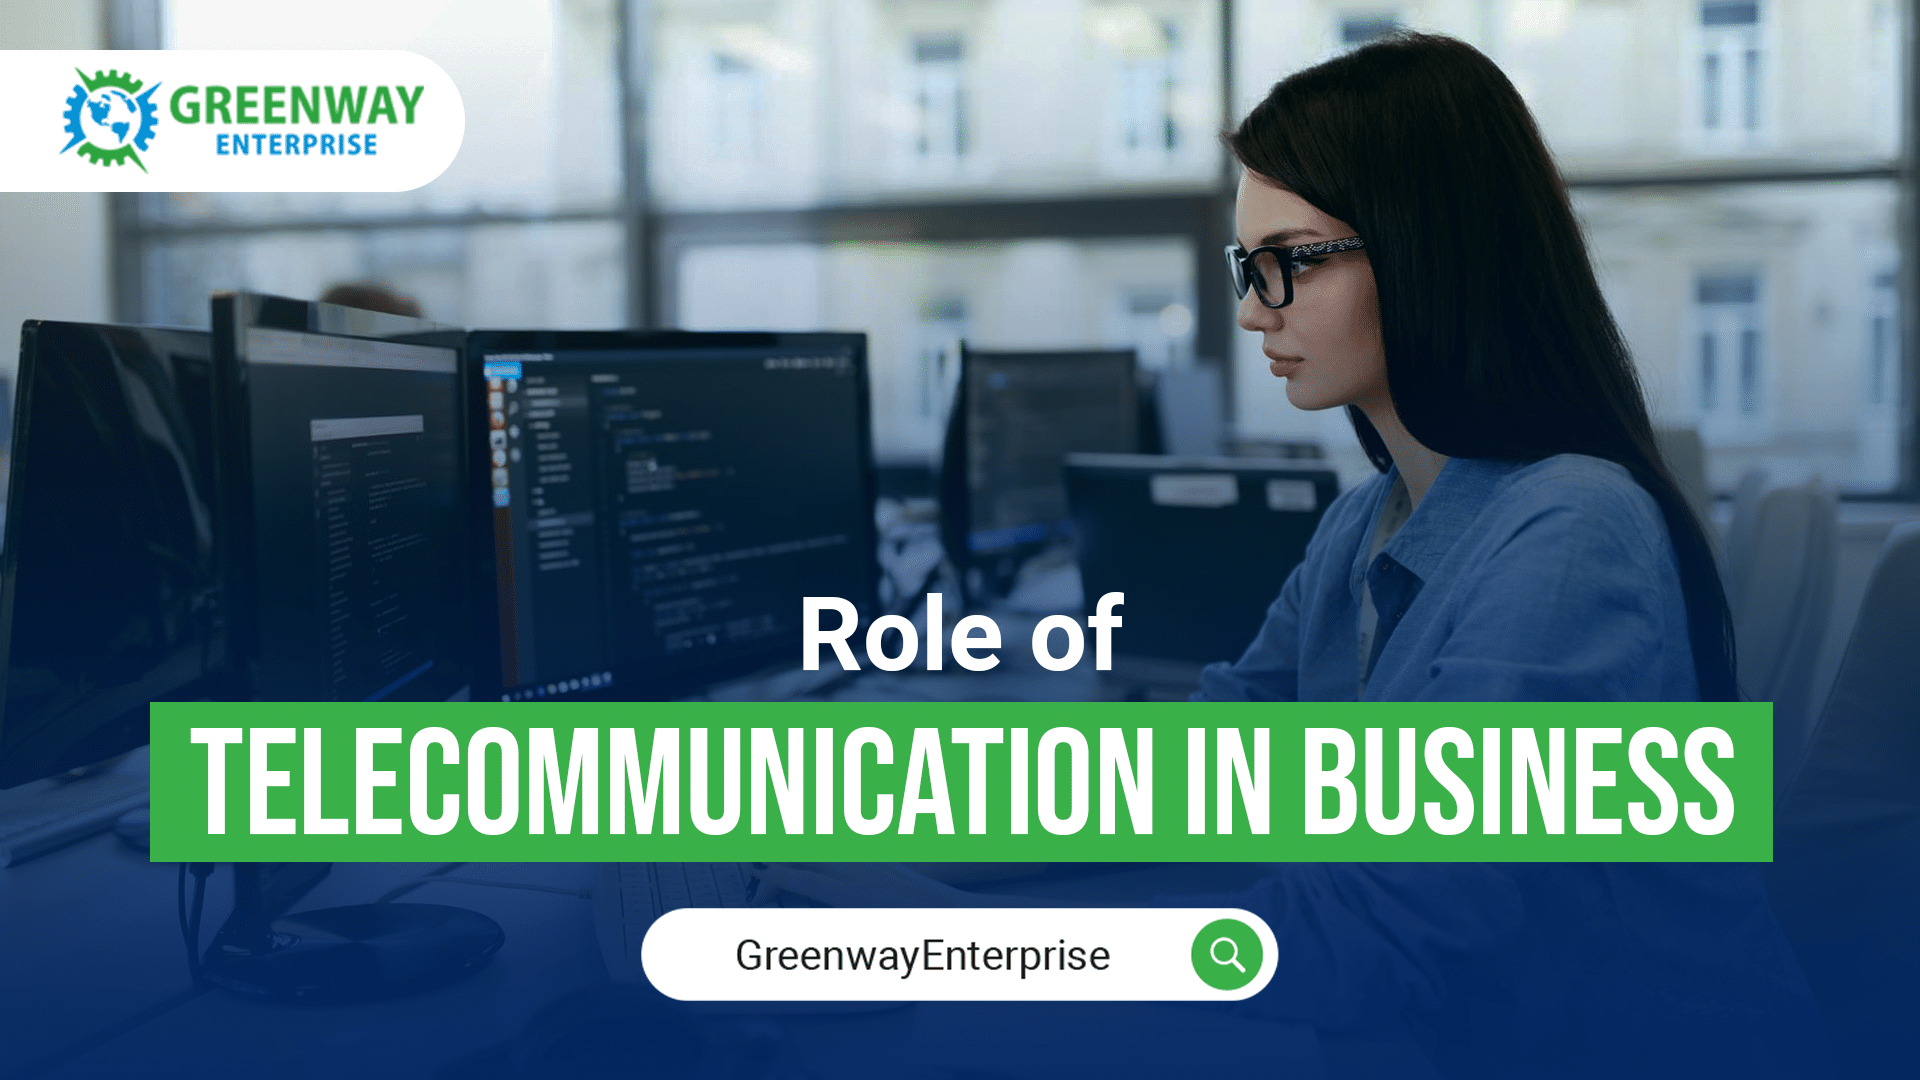 What is the Role of Telecommunication in Business